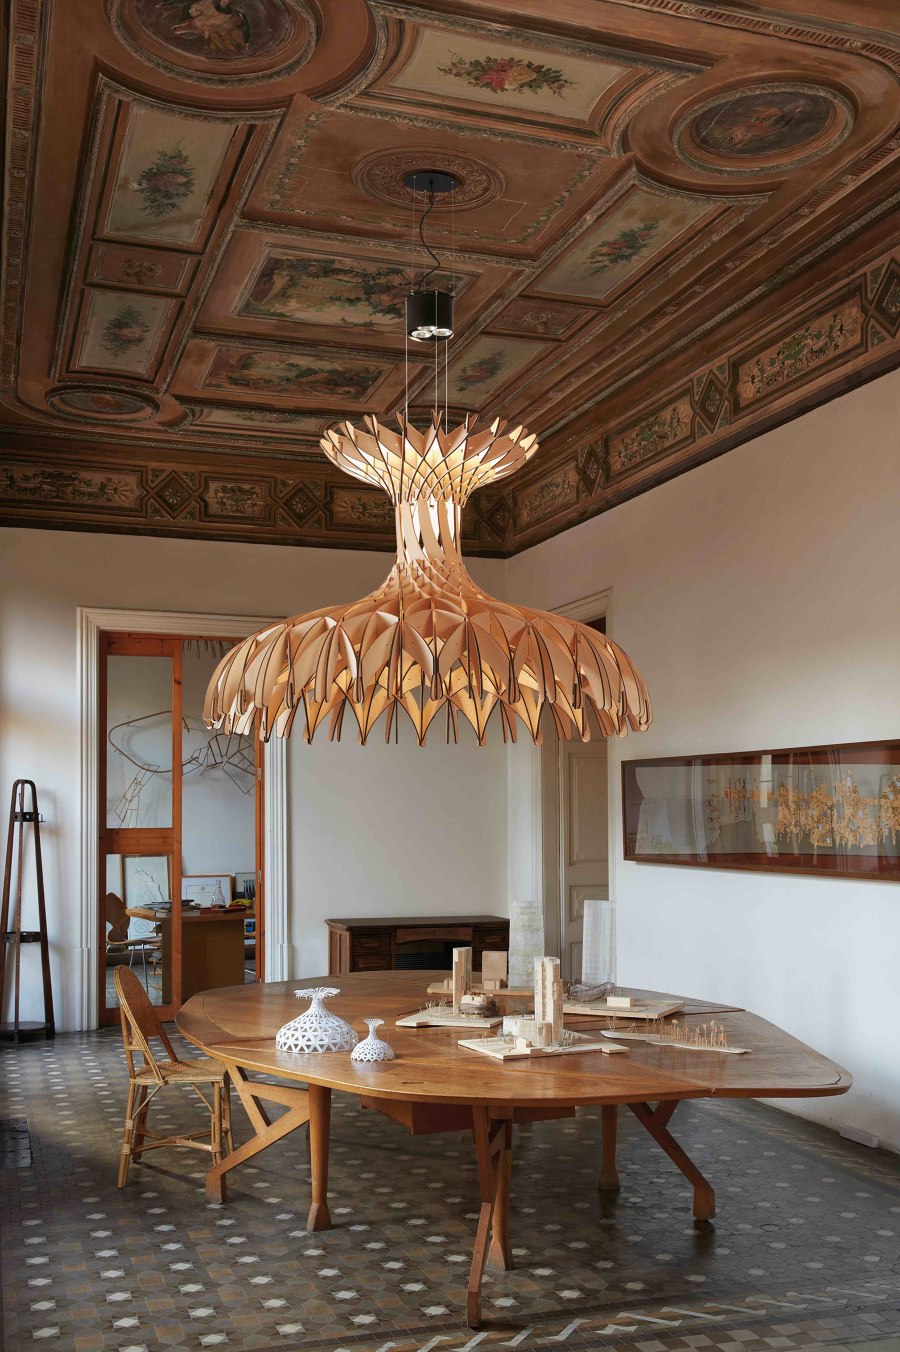 25 years of Mediterranean light from Bover | Novedades